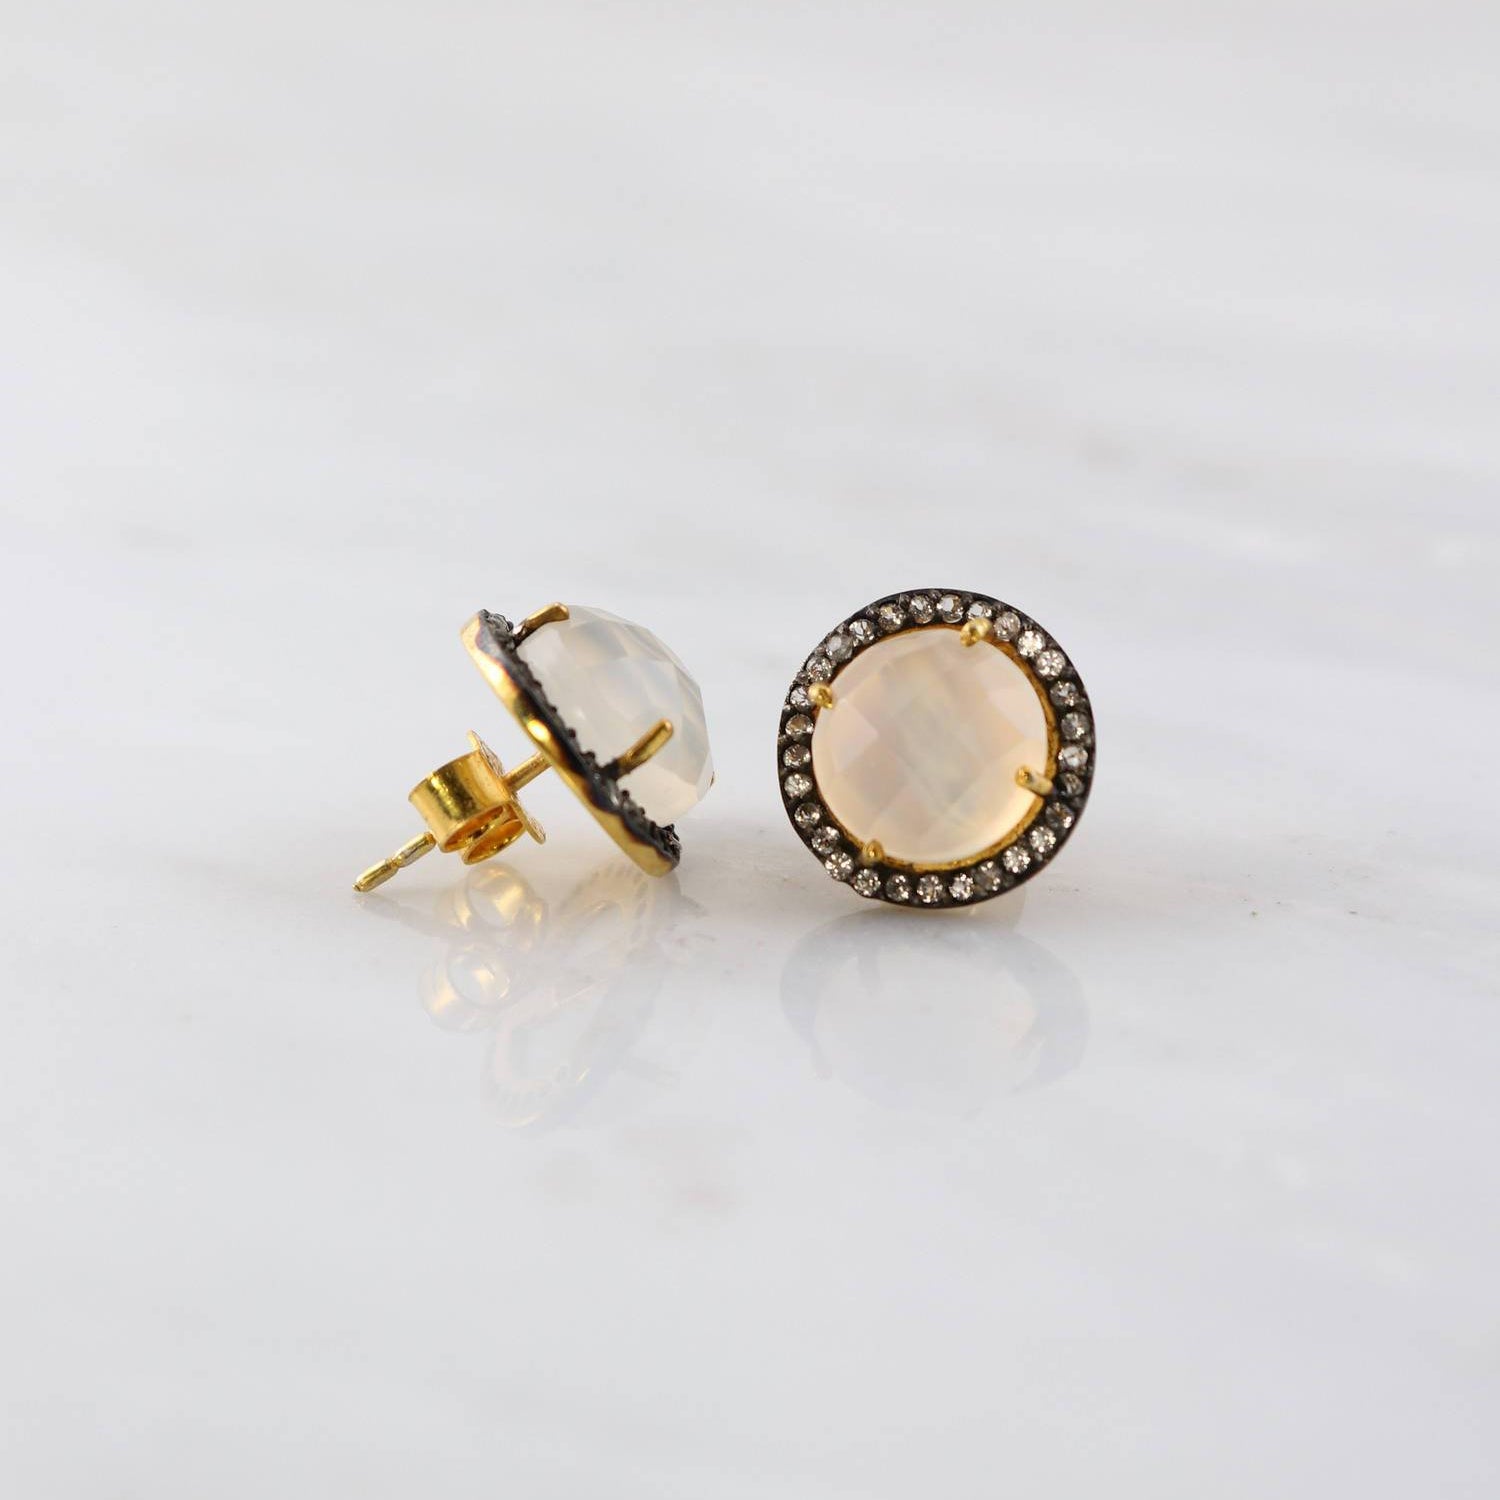 Chalcedony Studs Earring, Simple Post Studs, Oxidized Studs, Gold Studs Earring, Topaz Studs, Bridesmaid Gift, Gift for her, Designer Studs